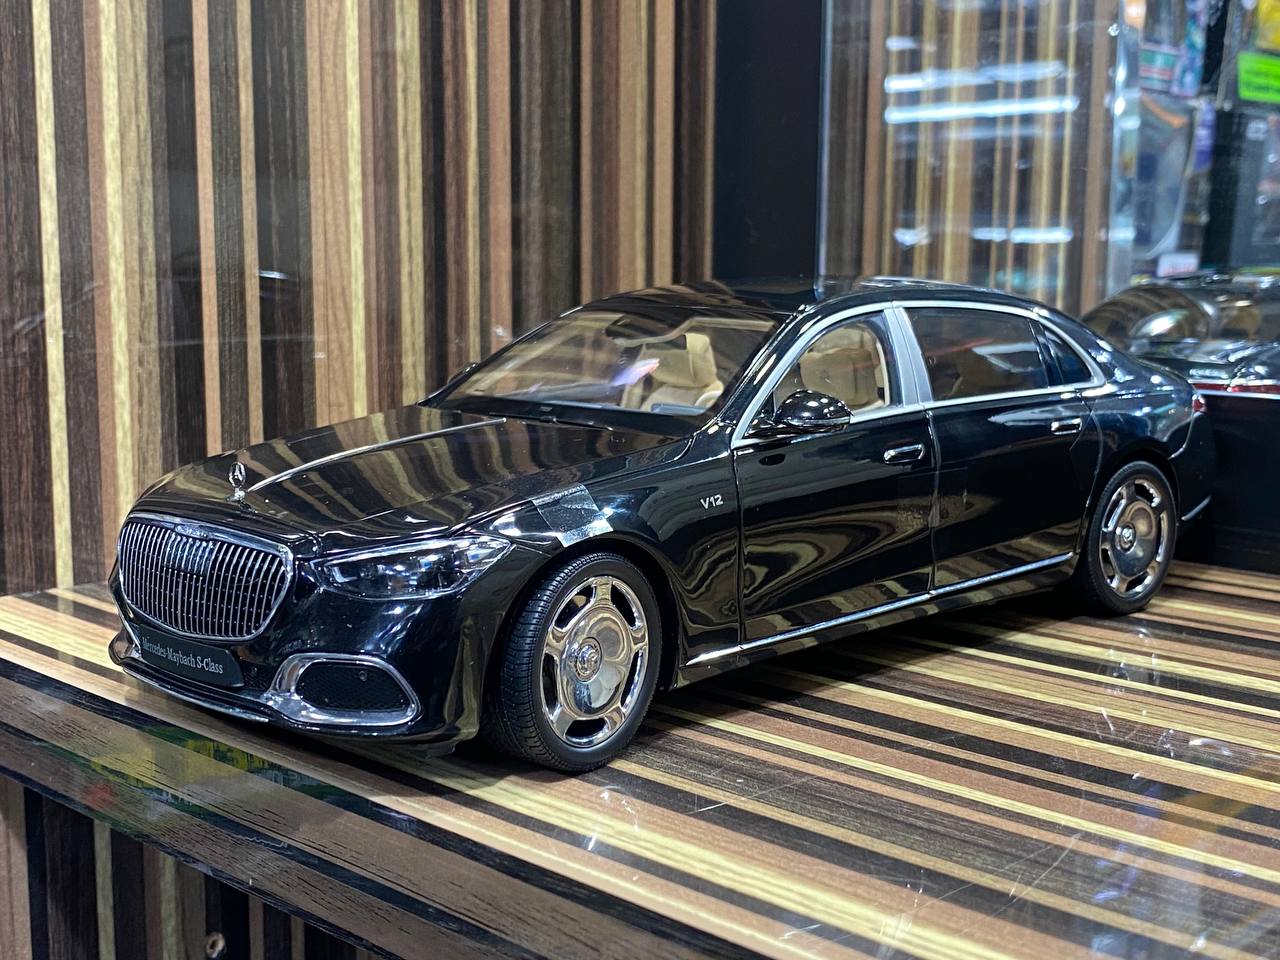 1/18 Diecast Mercedes-Benz S-Class Maybach S 680 Almost Real Scale Model Car|Sold in Dturman.com Dubai UAE.